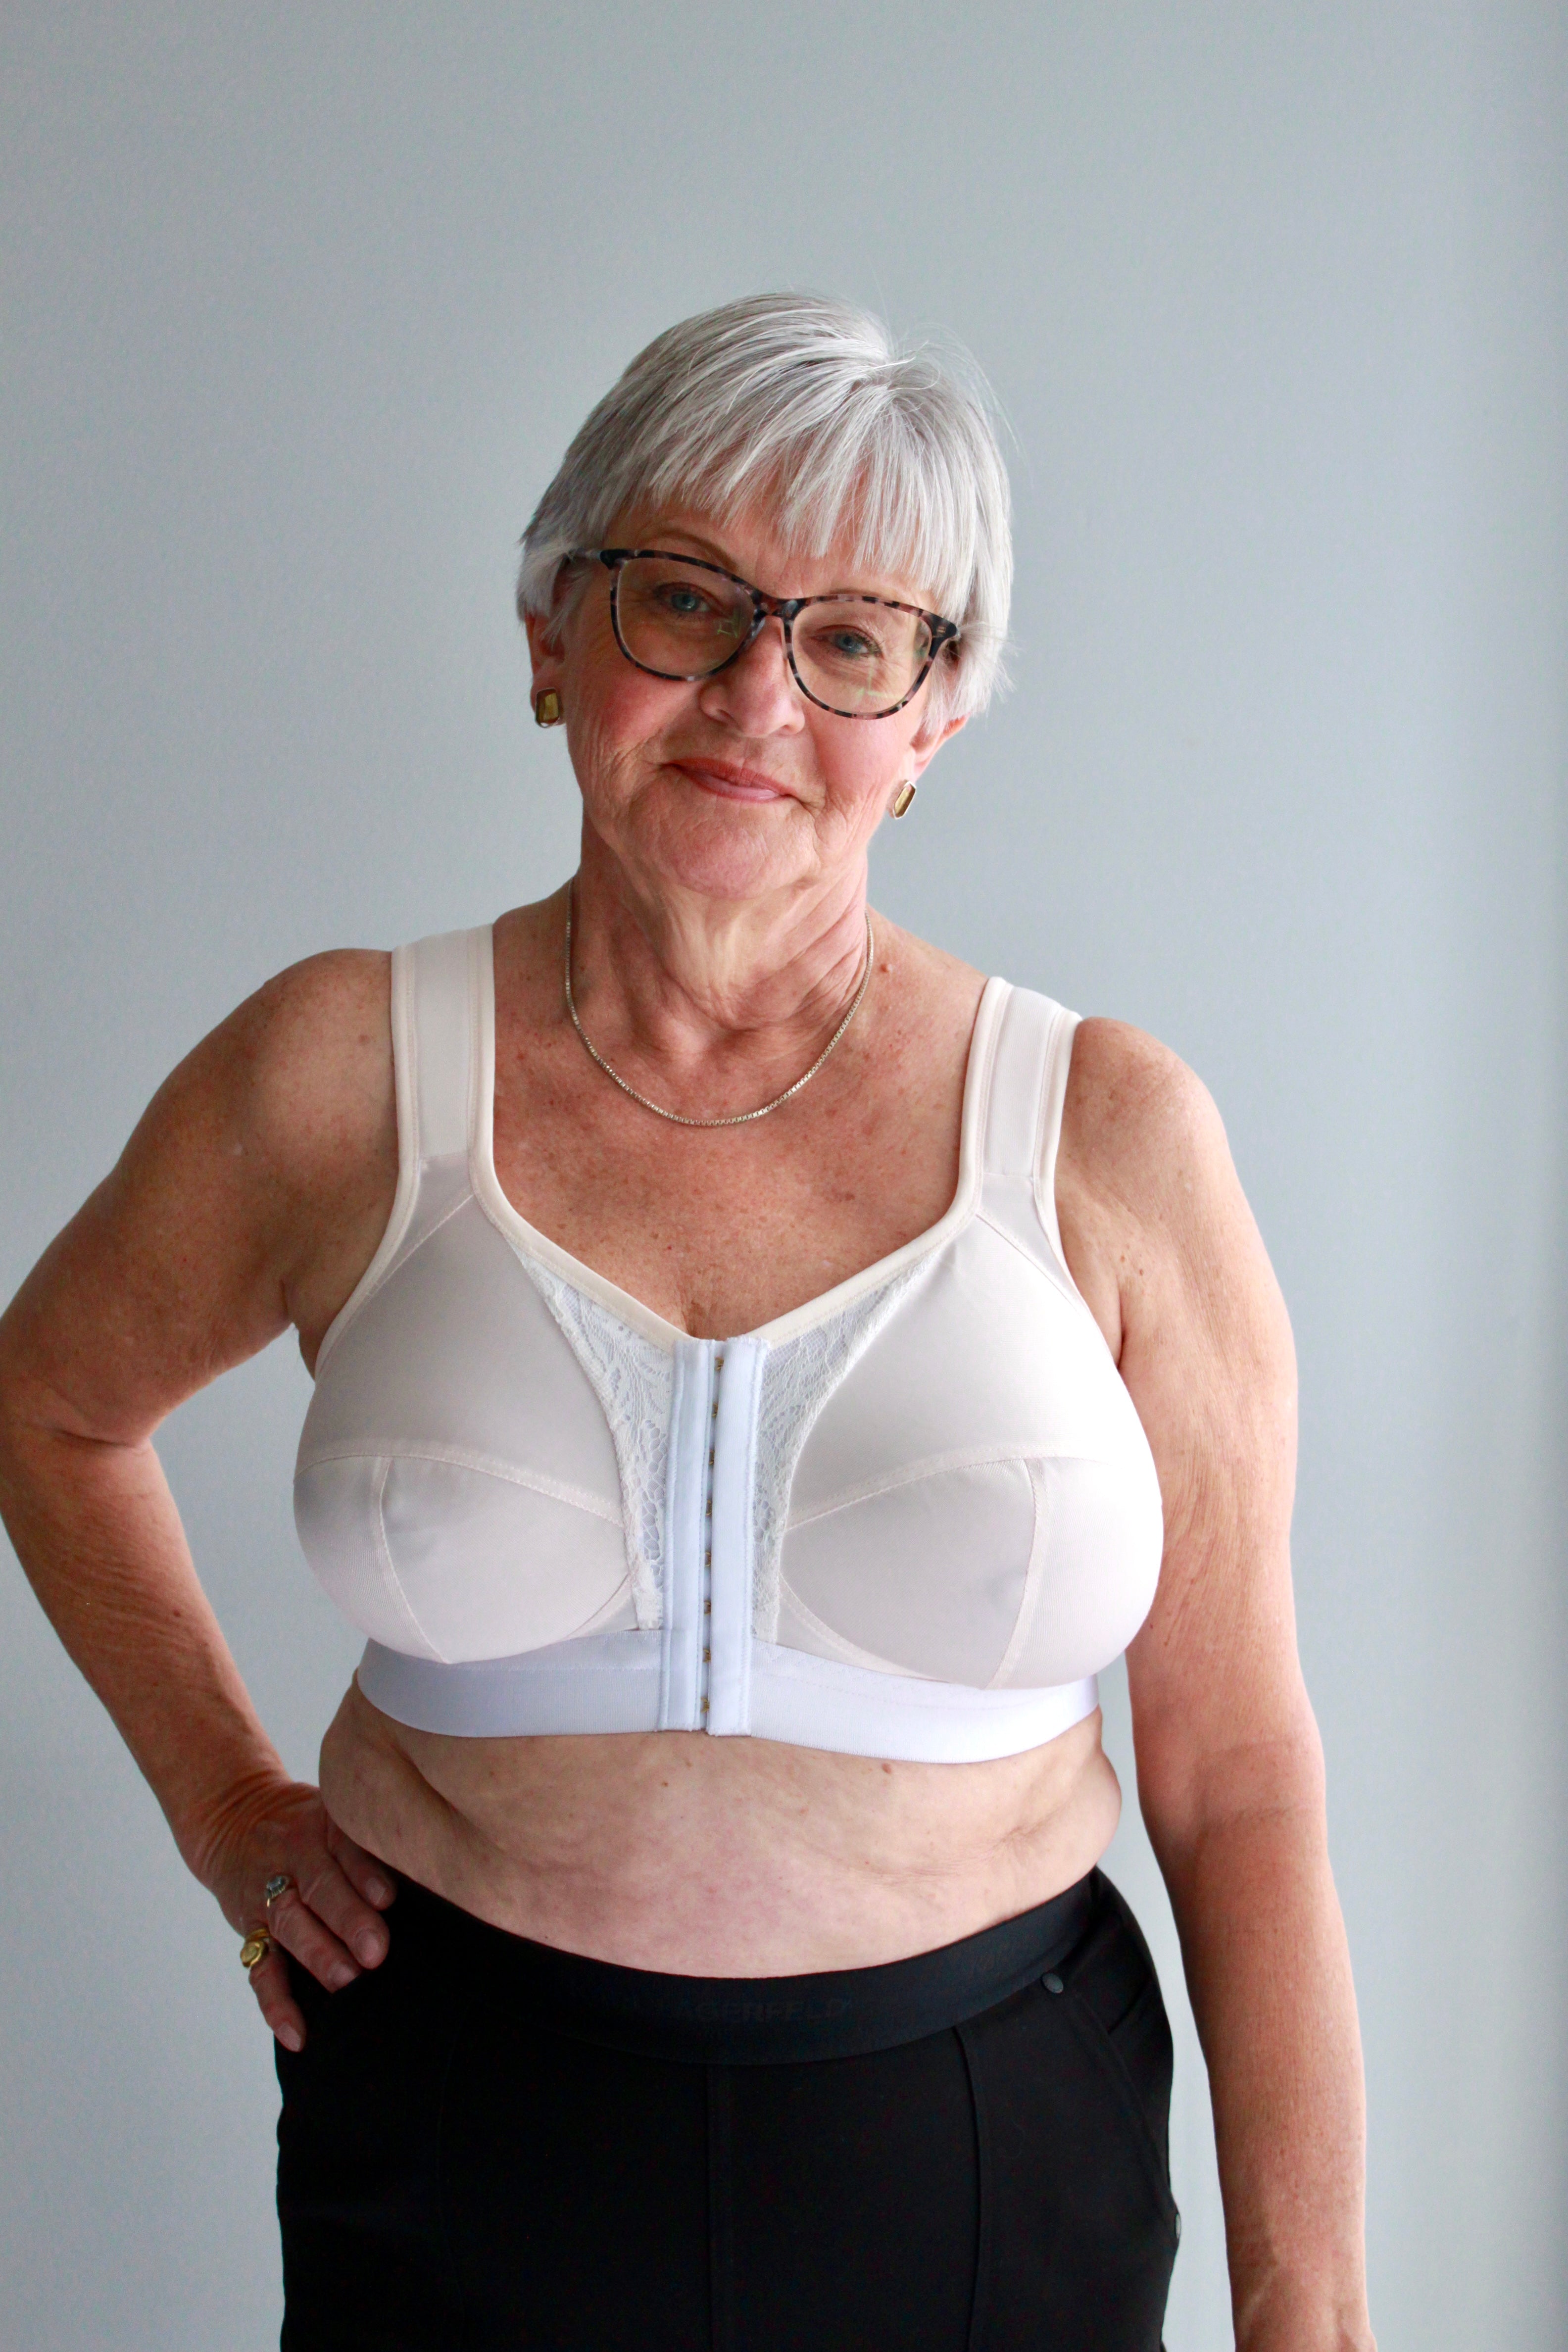 Mastectomy Breast Cancer & Post Surgical Bras